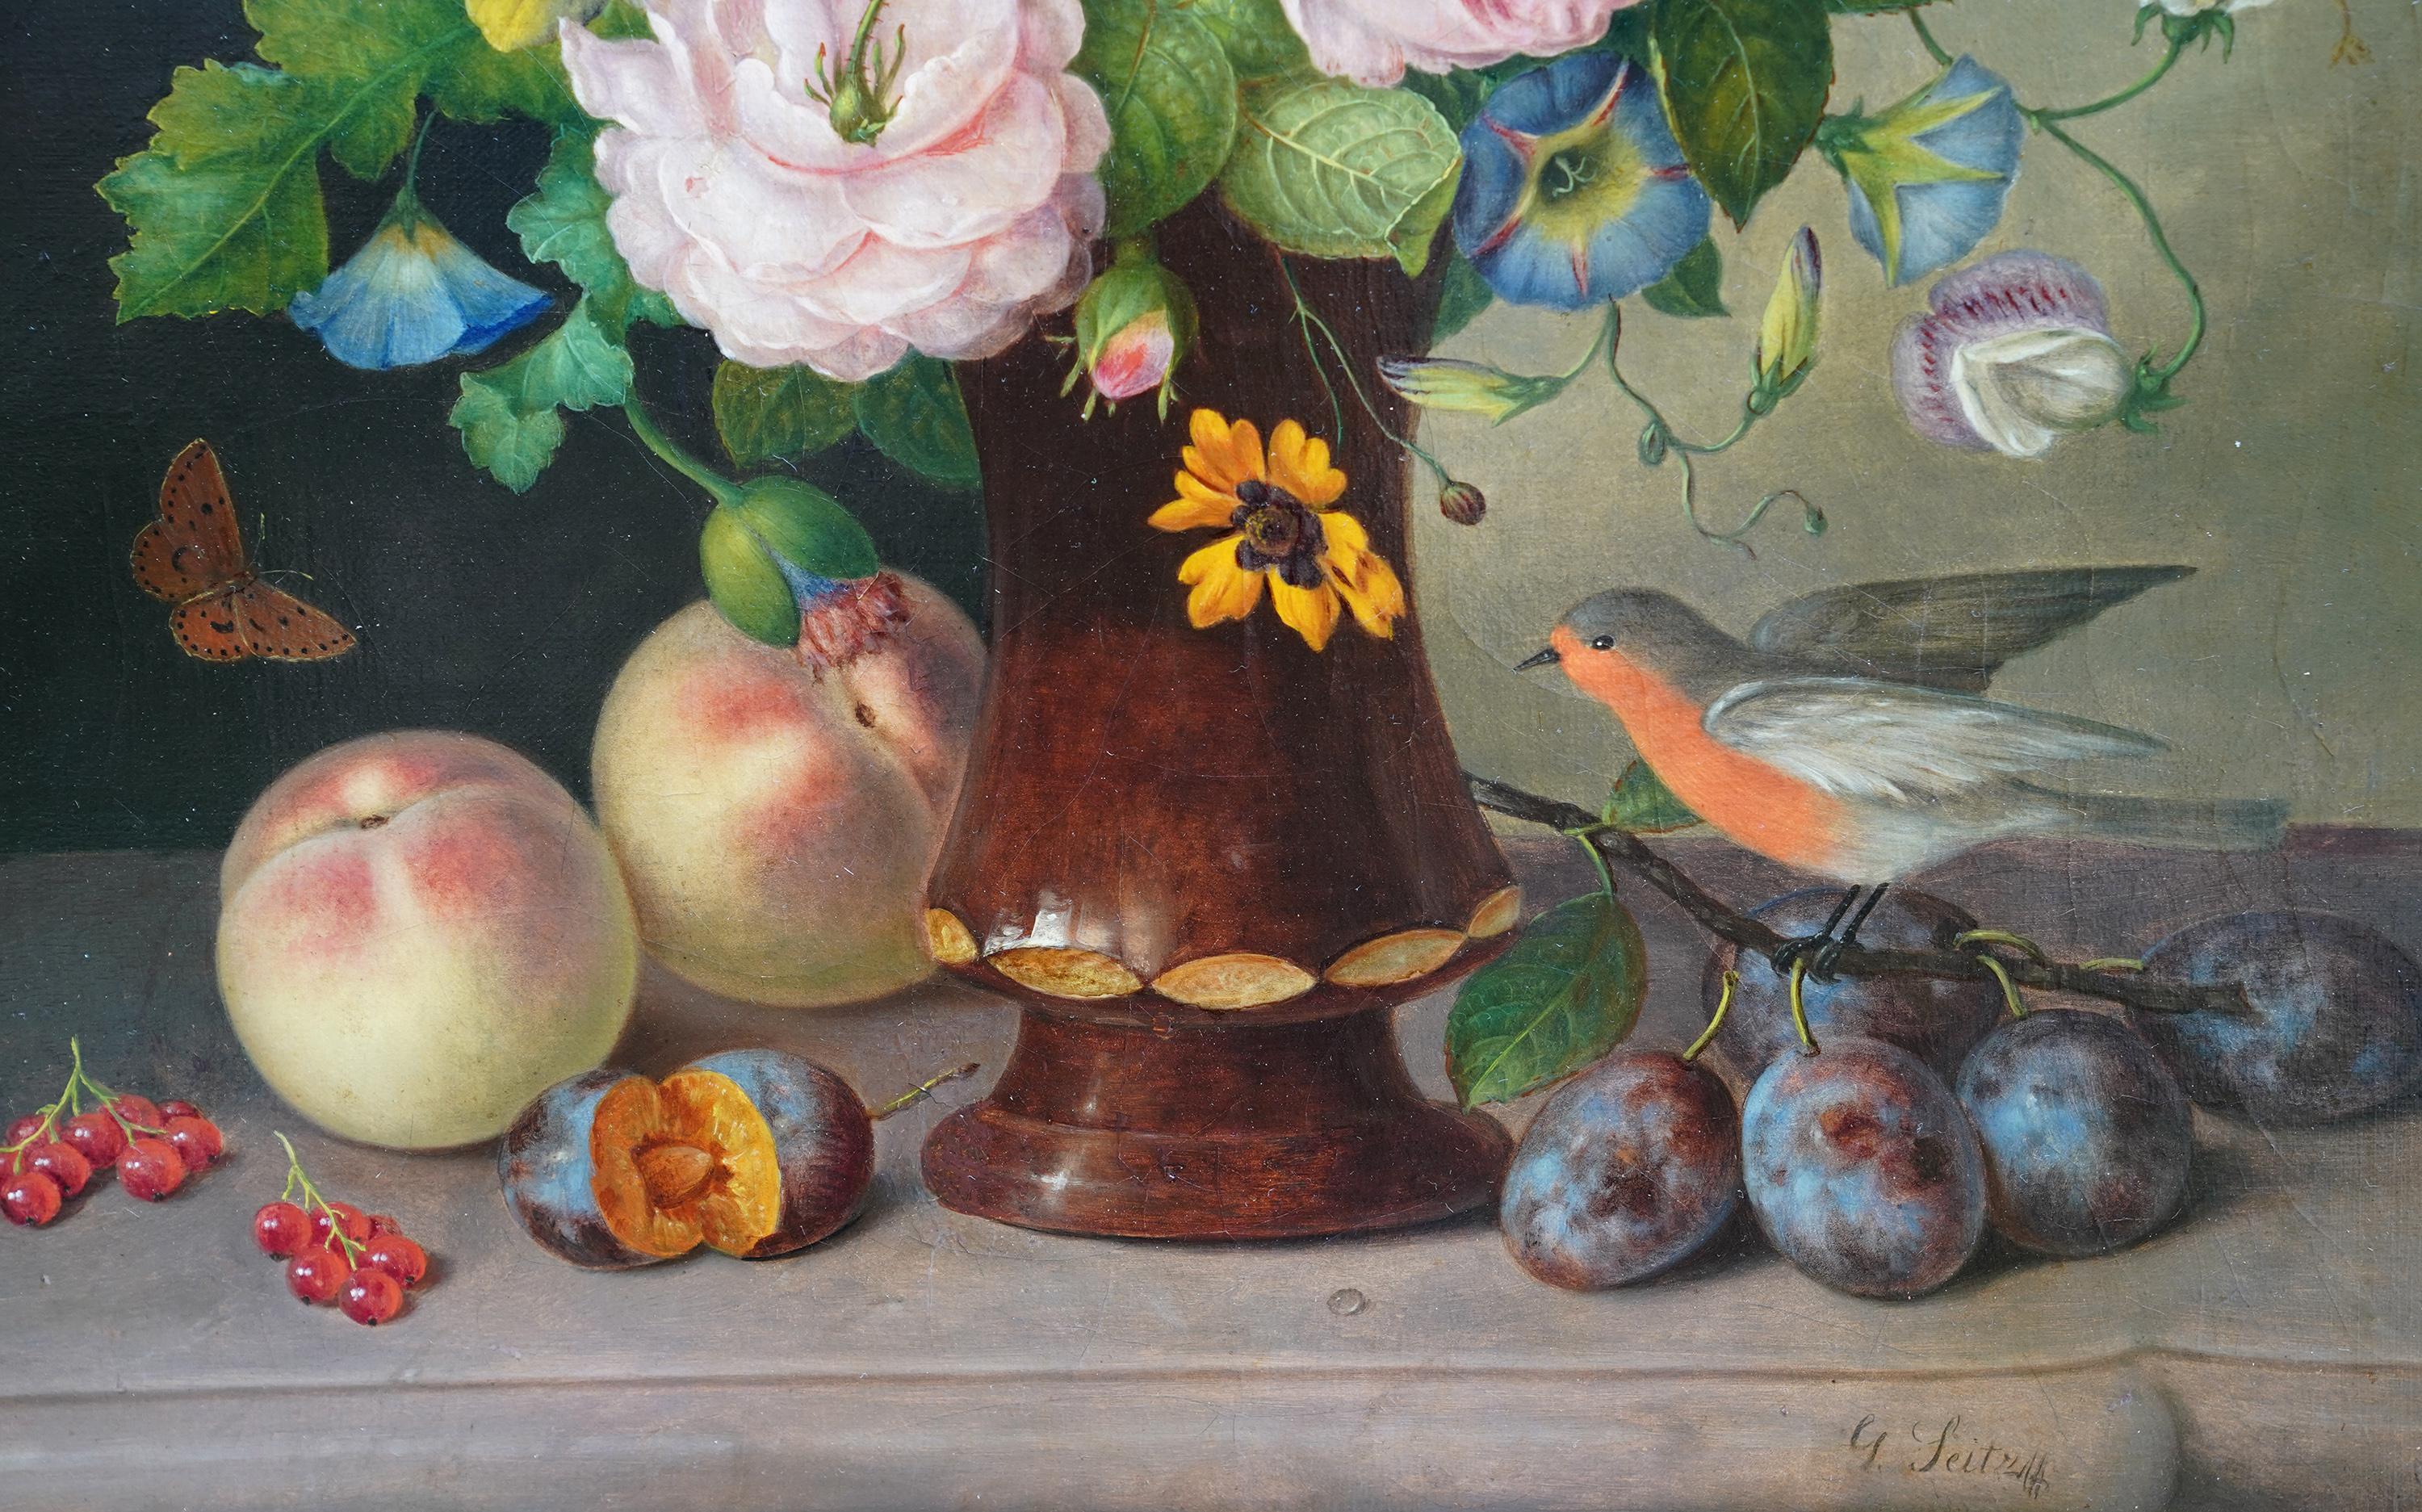 This beautiful 19th century floral still life oil painting is by noted German/Austrian artist Johnann Georg Seitz. Painted circa 1850 it is a mixed floral arrangement in a terracotta vase on a ledge. Around the base are several fruits, a copper